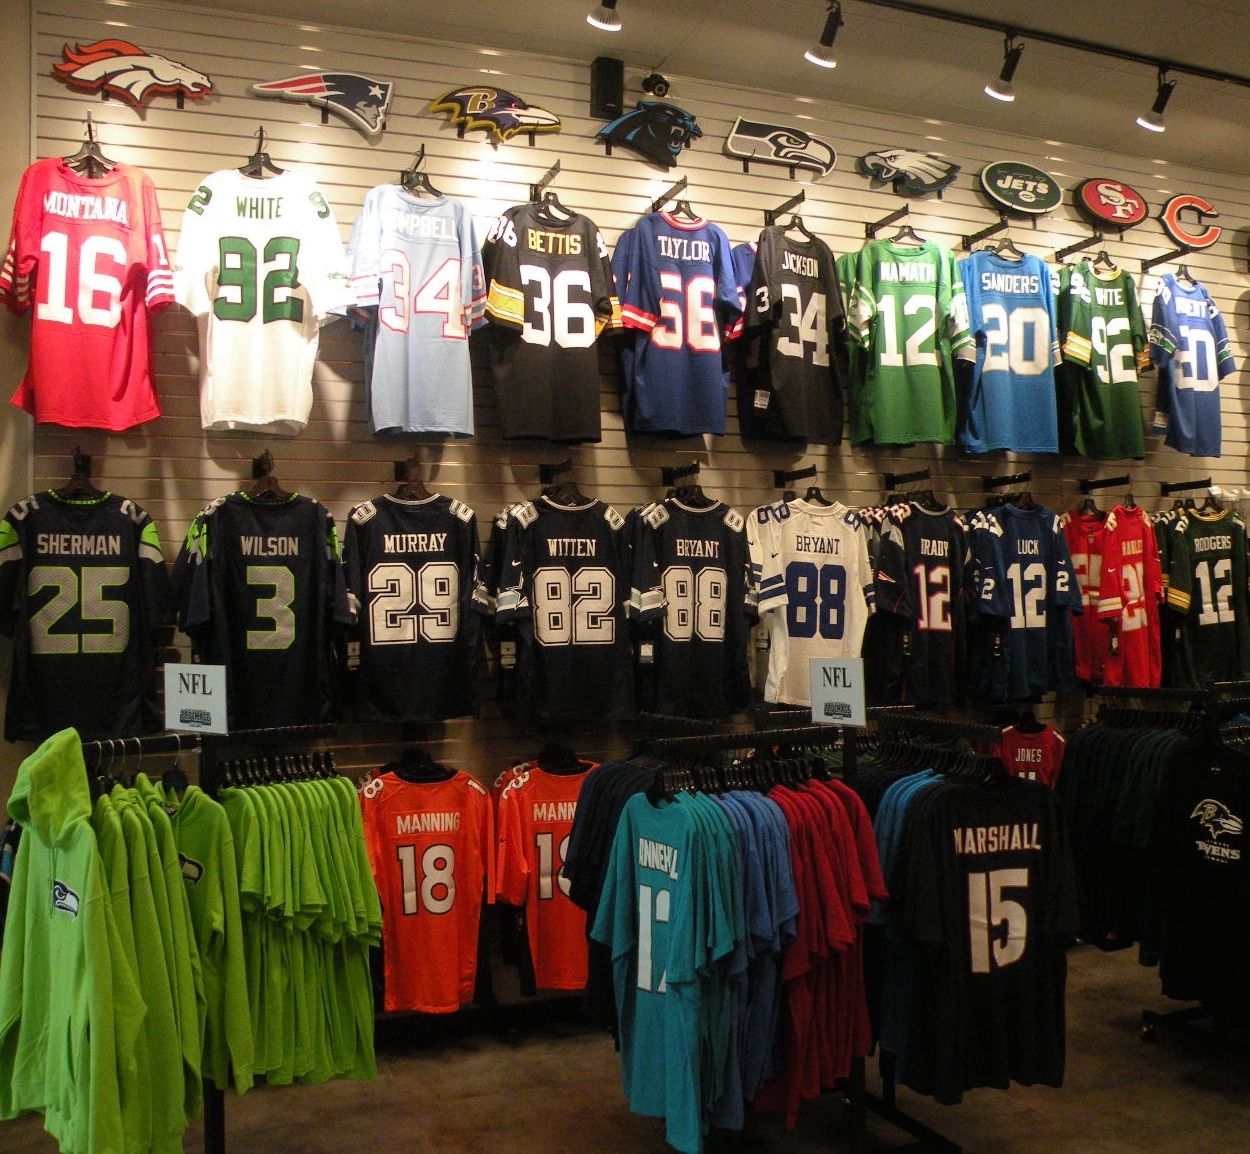 Pro Image Sports Expansion Continues With New Store In Florida